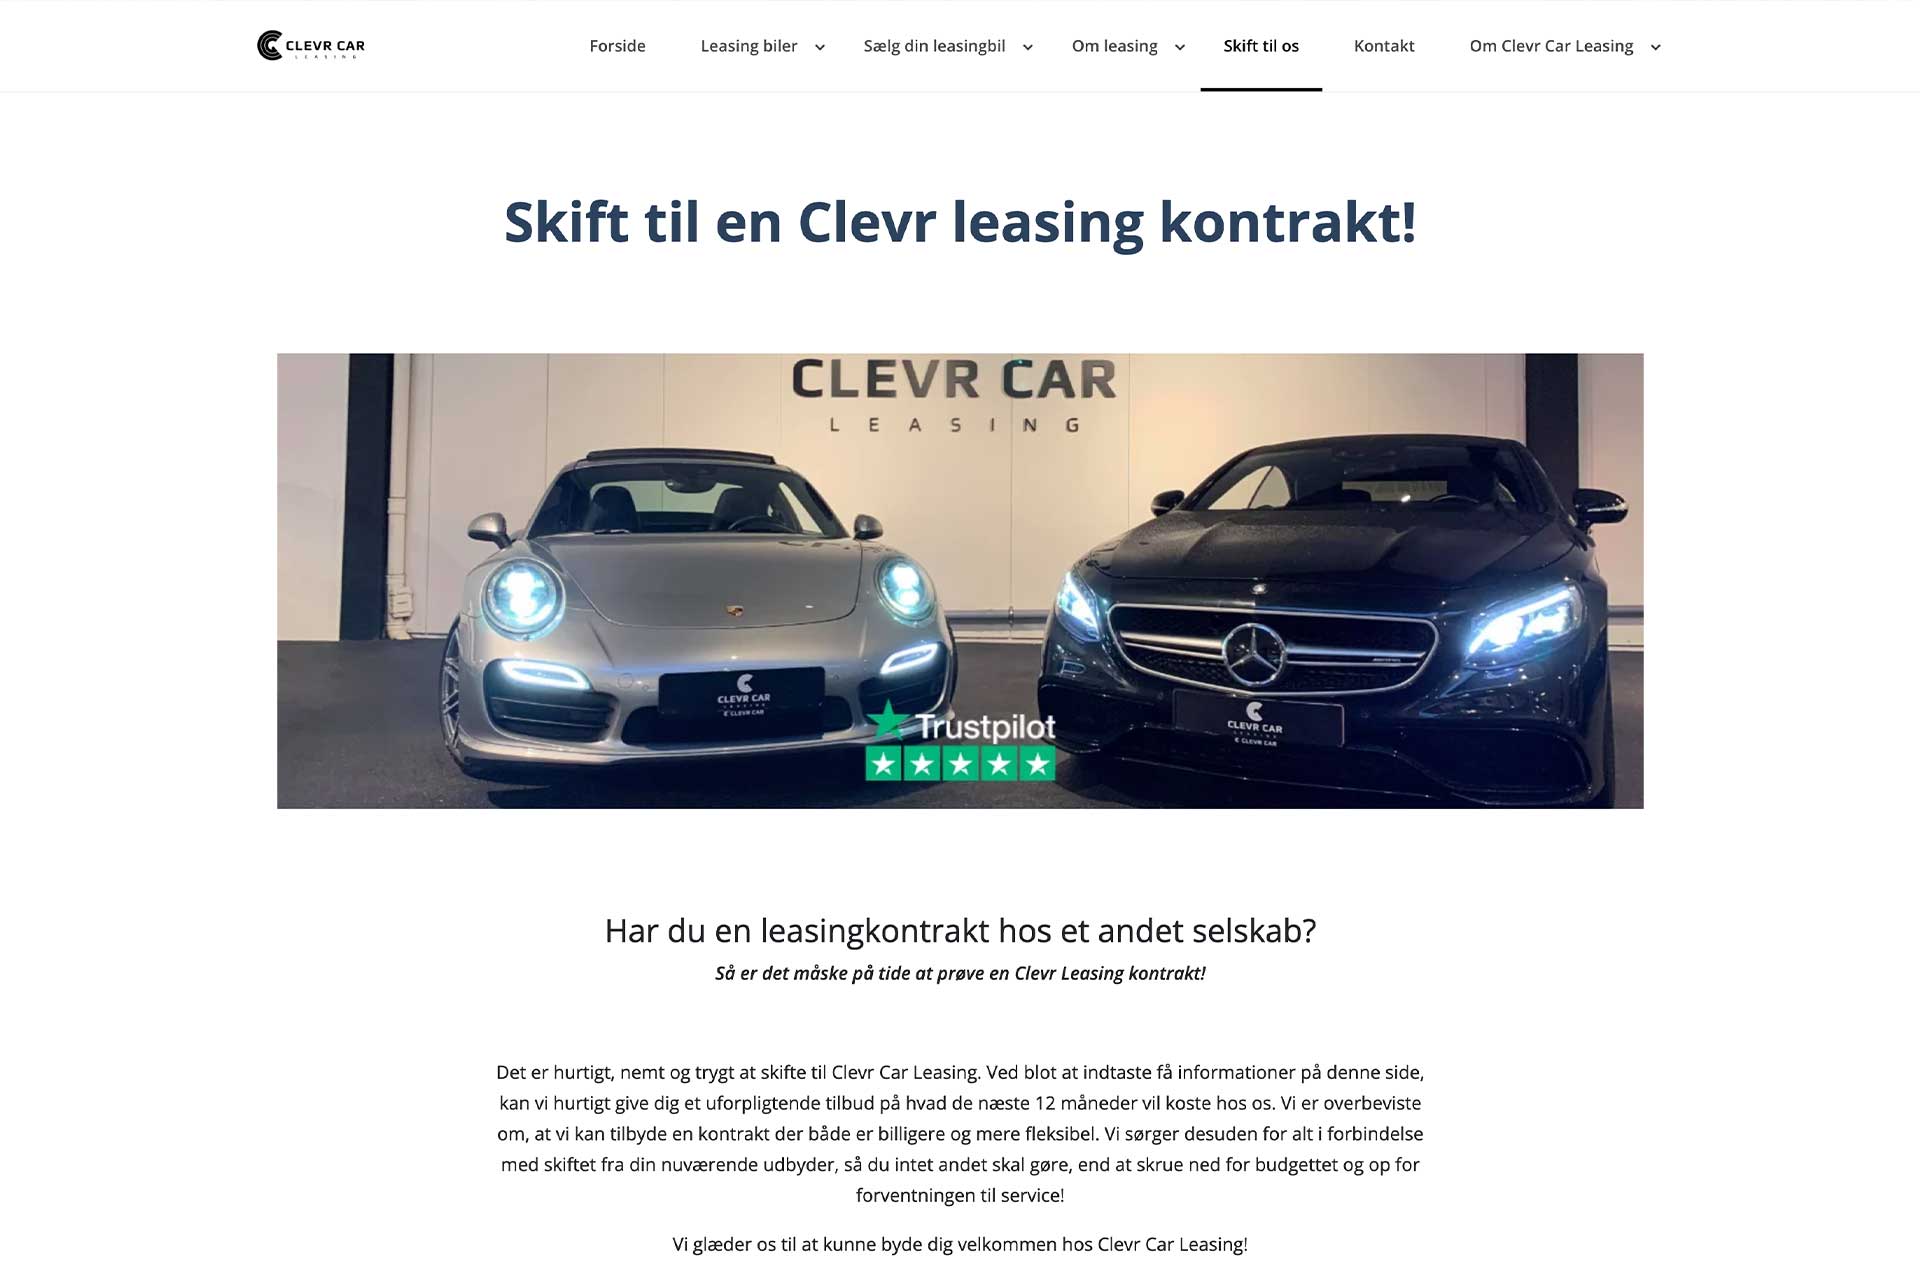 Clevr Car Leasing